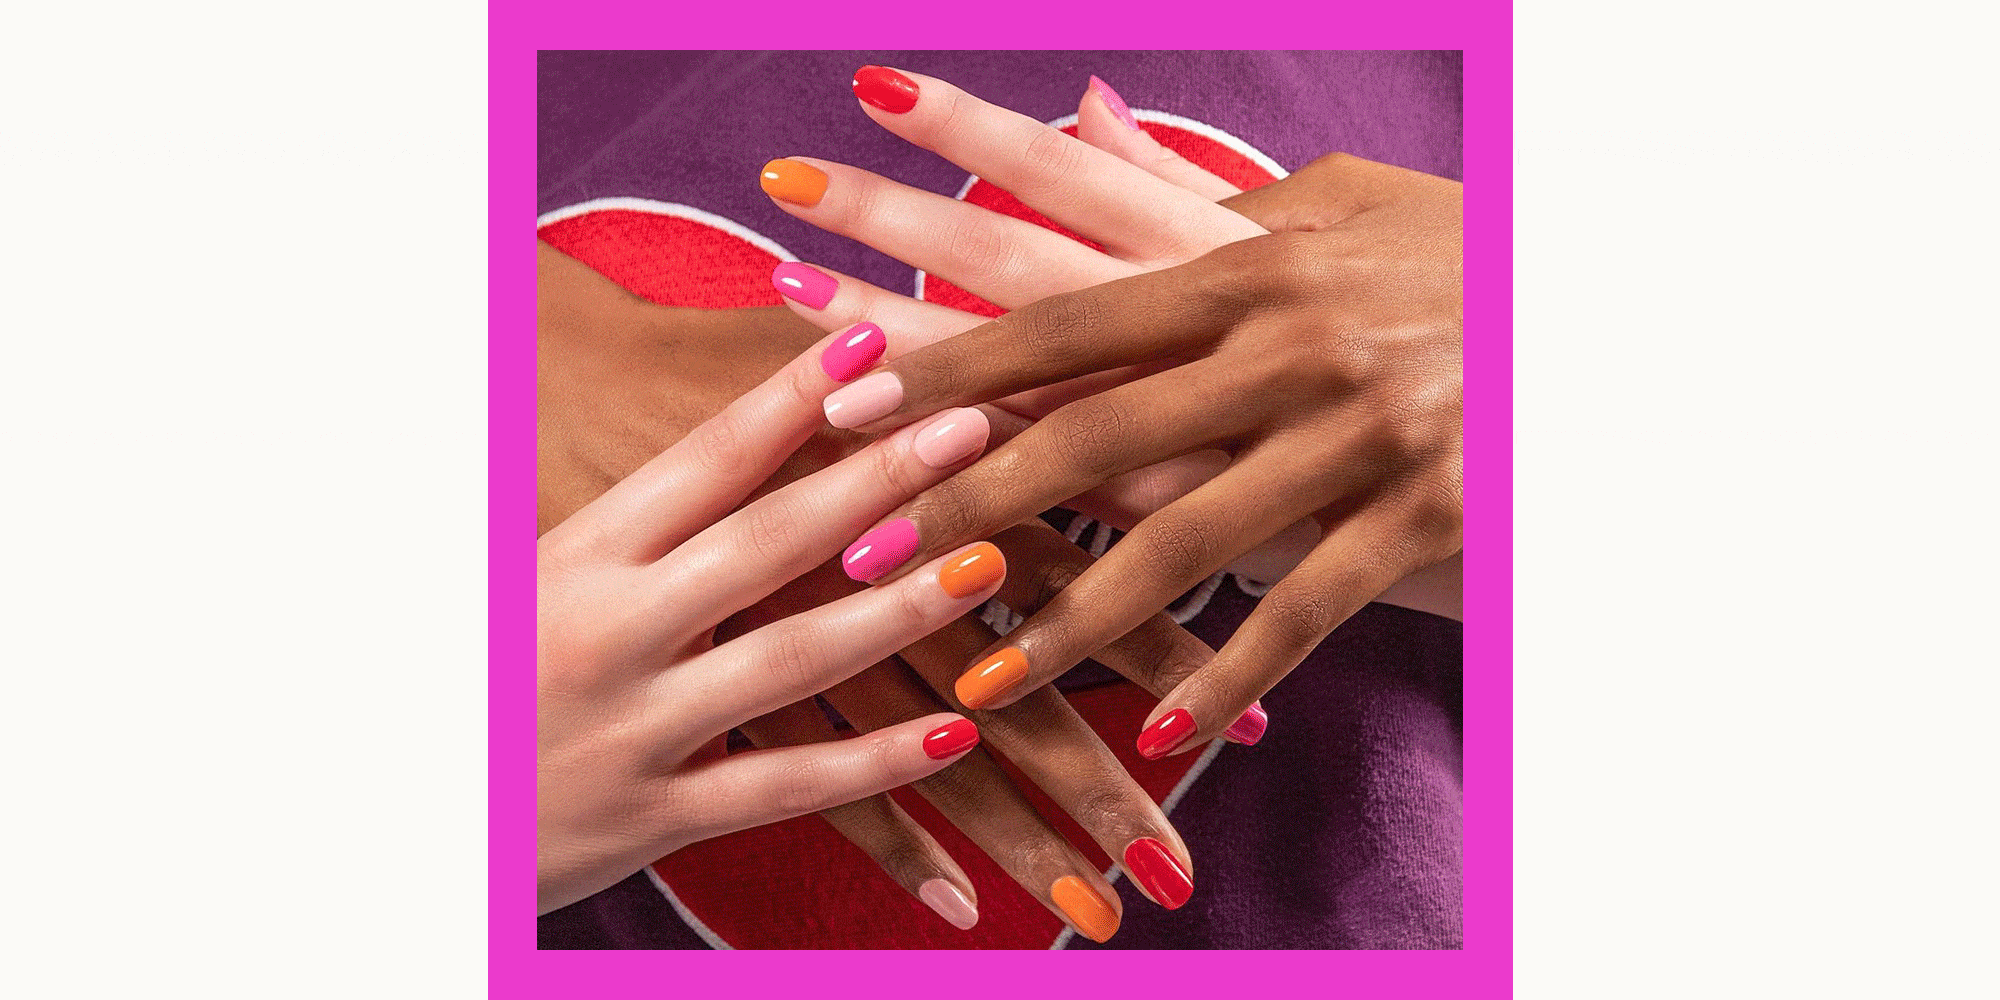 3. "Boys Love" Nail Color Trends for 2021 - wide 6